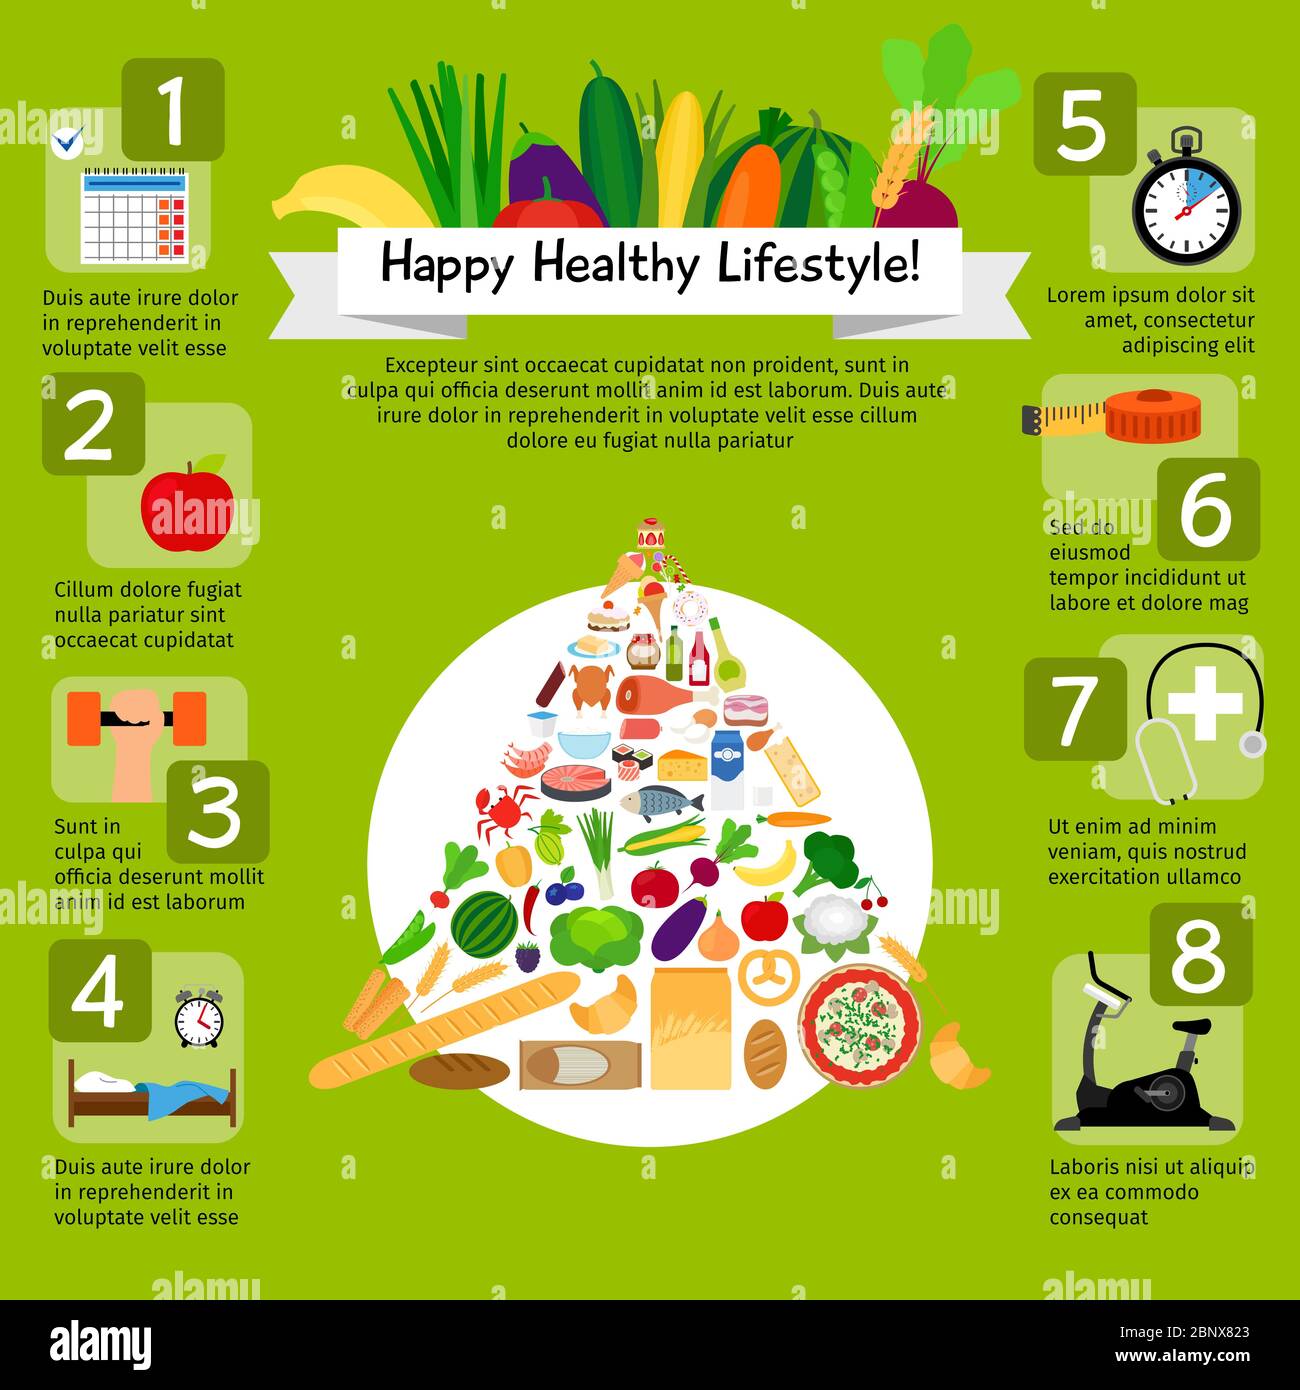 Happy Healthy Lifestyle Infographic Design With Healthy Food And Sport